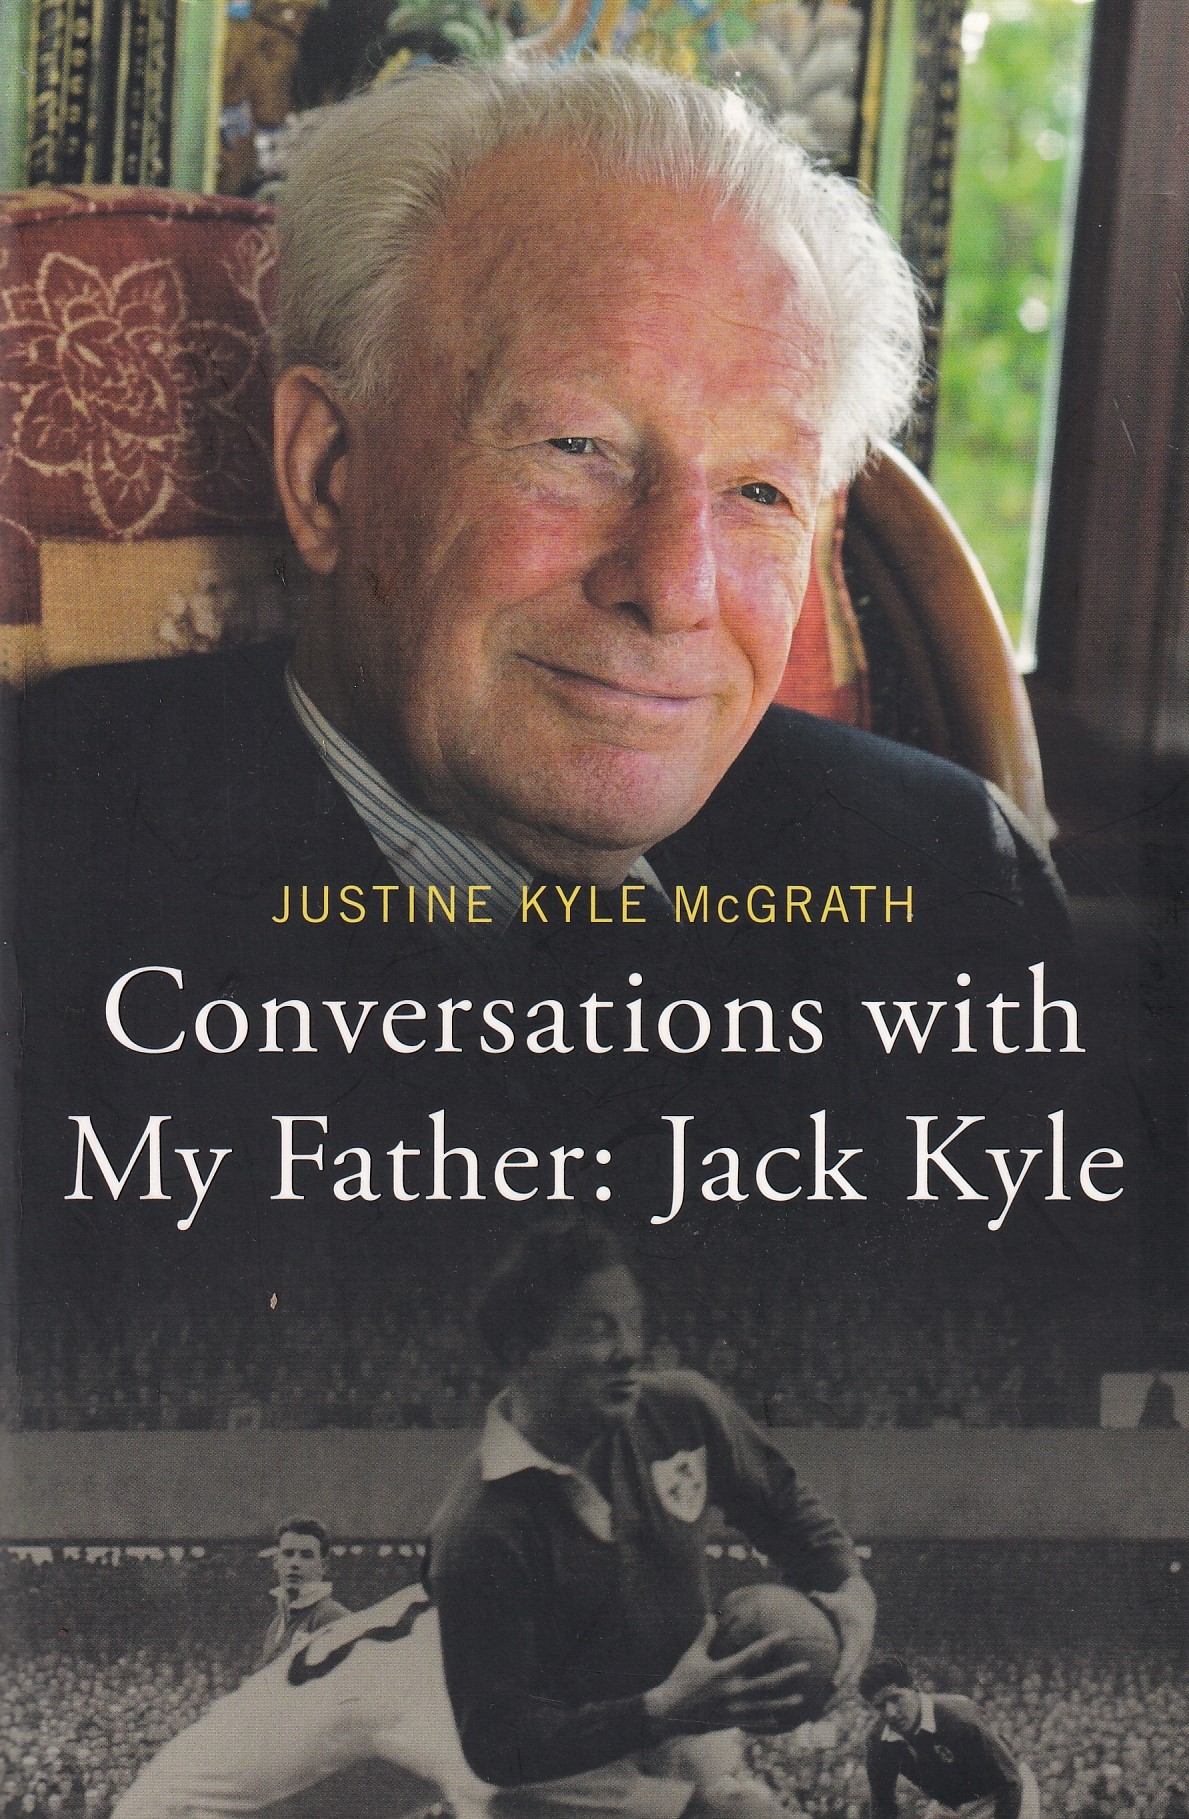 Conversations with My Father: Jack Kyle by Justine Kyle McGrath